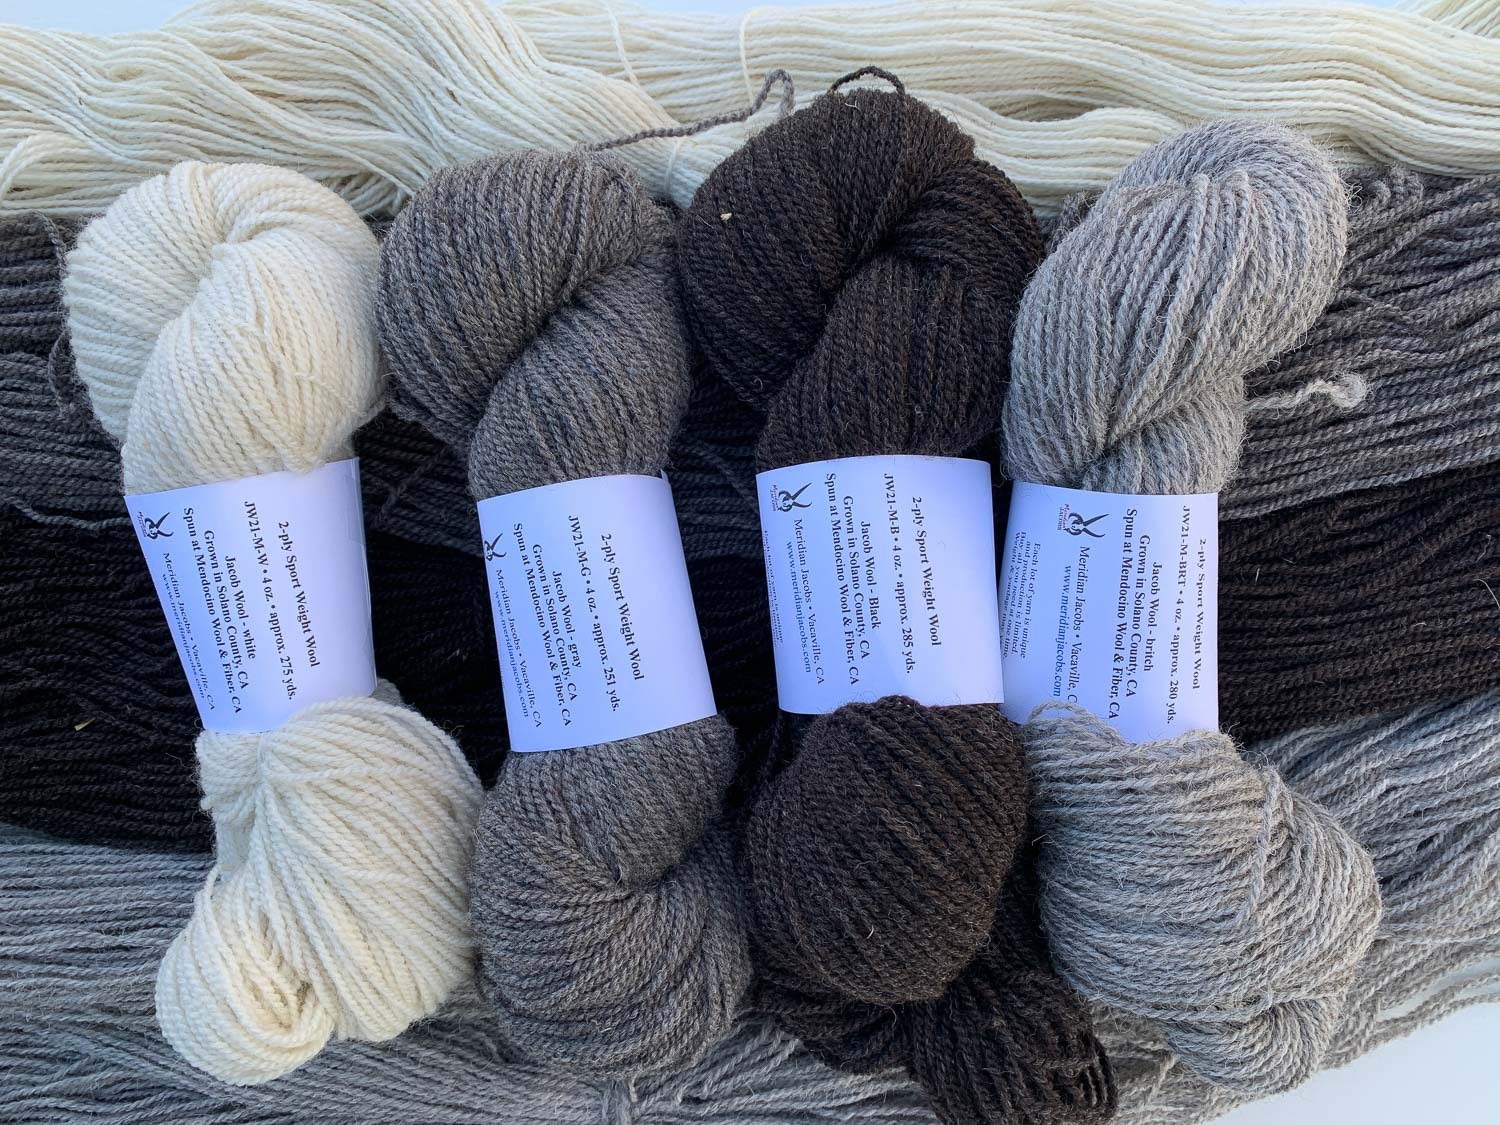 Locally Grown Fleece Fiber and Hand Woven Wool Products in